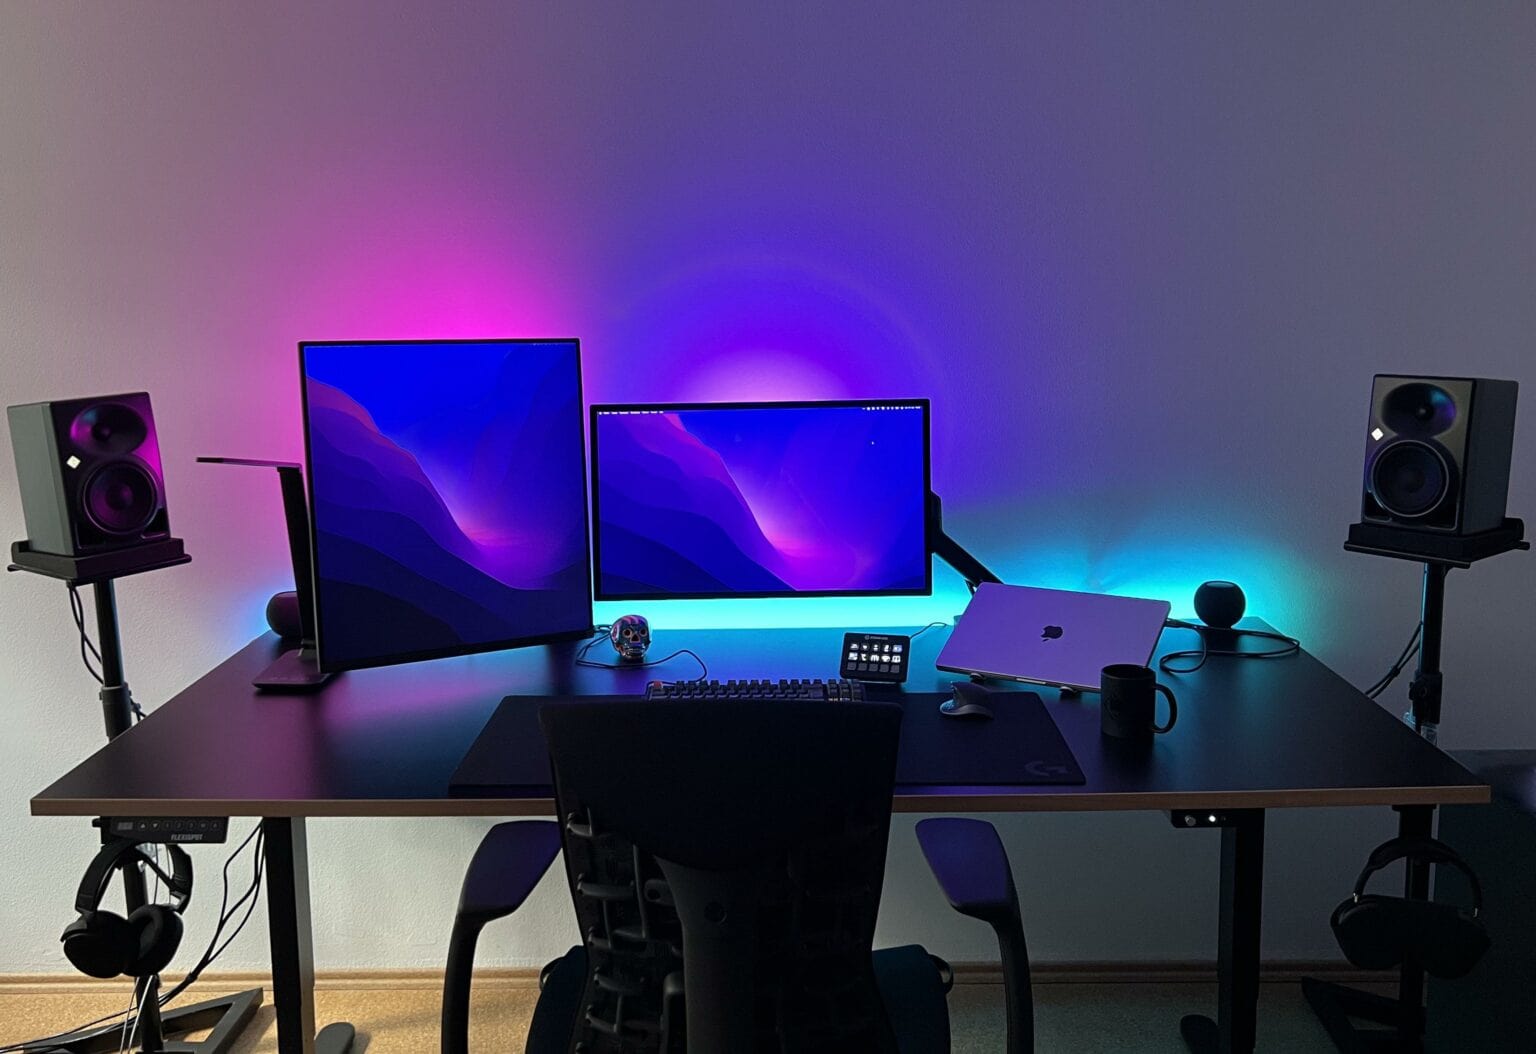 The user, a developer, finds a Studio Display paired with an LG DualUp monitor ideal for his work.